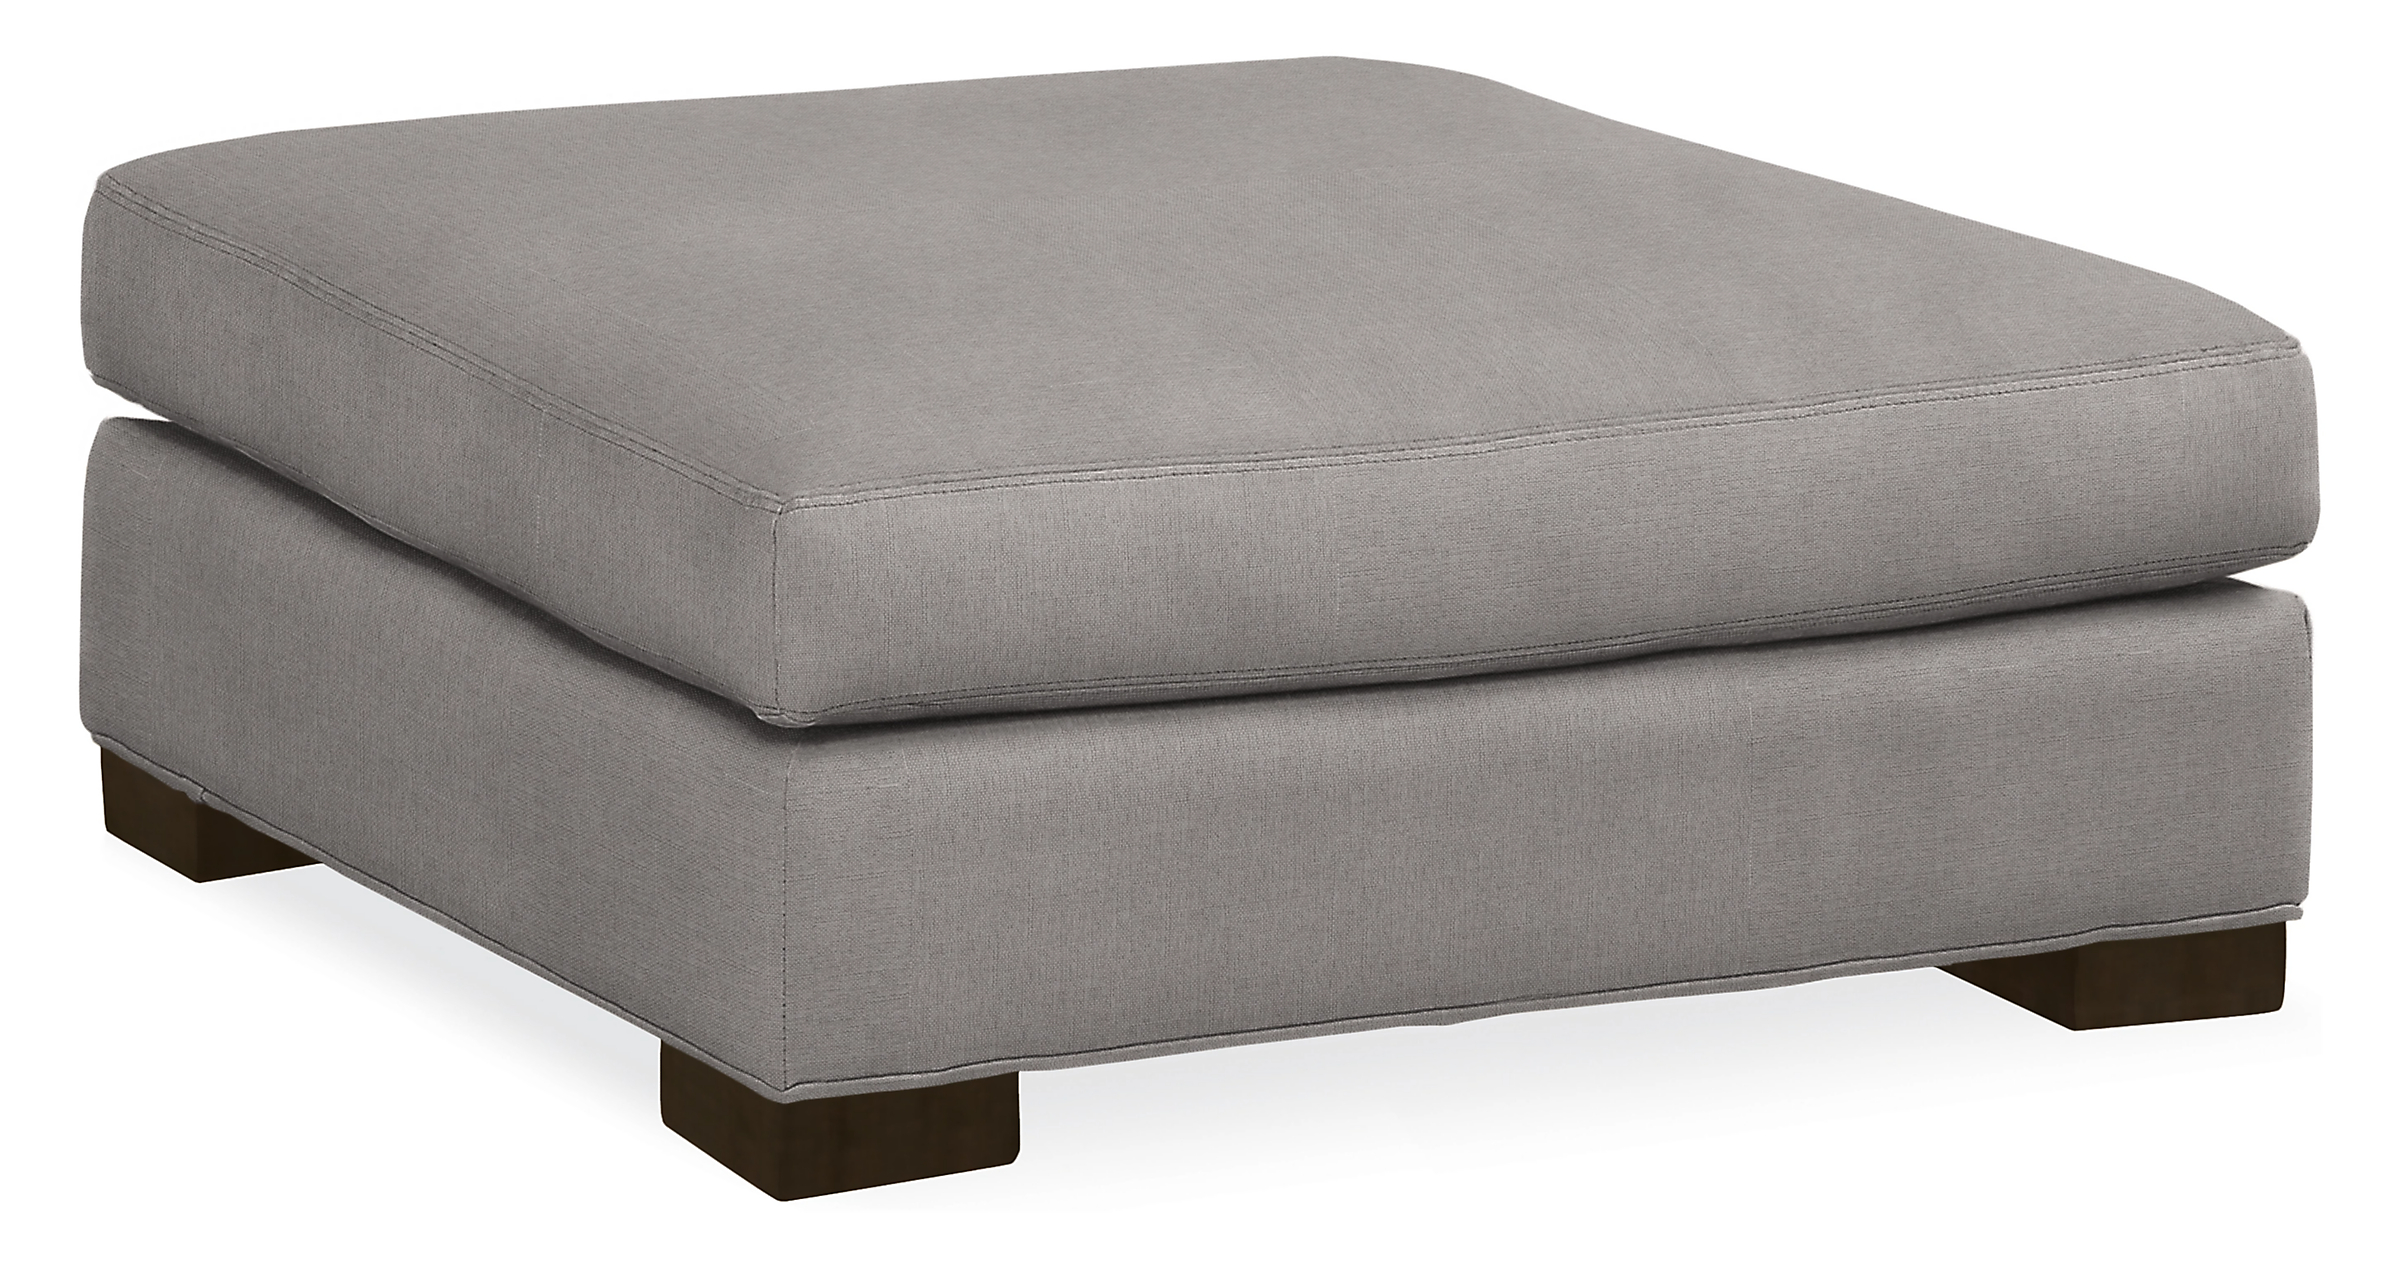 Metro 38w 38d 17h Square Ottoman in Pelham Smoke with Charcoal Legs